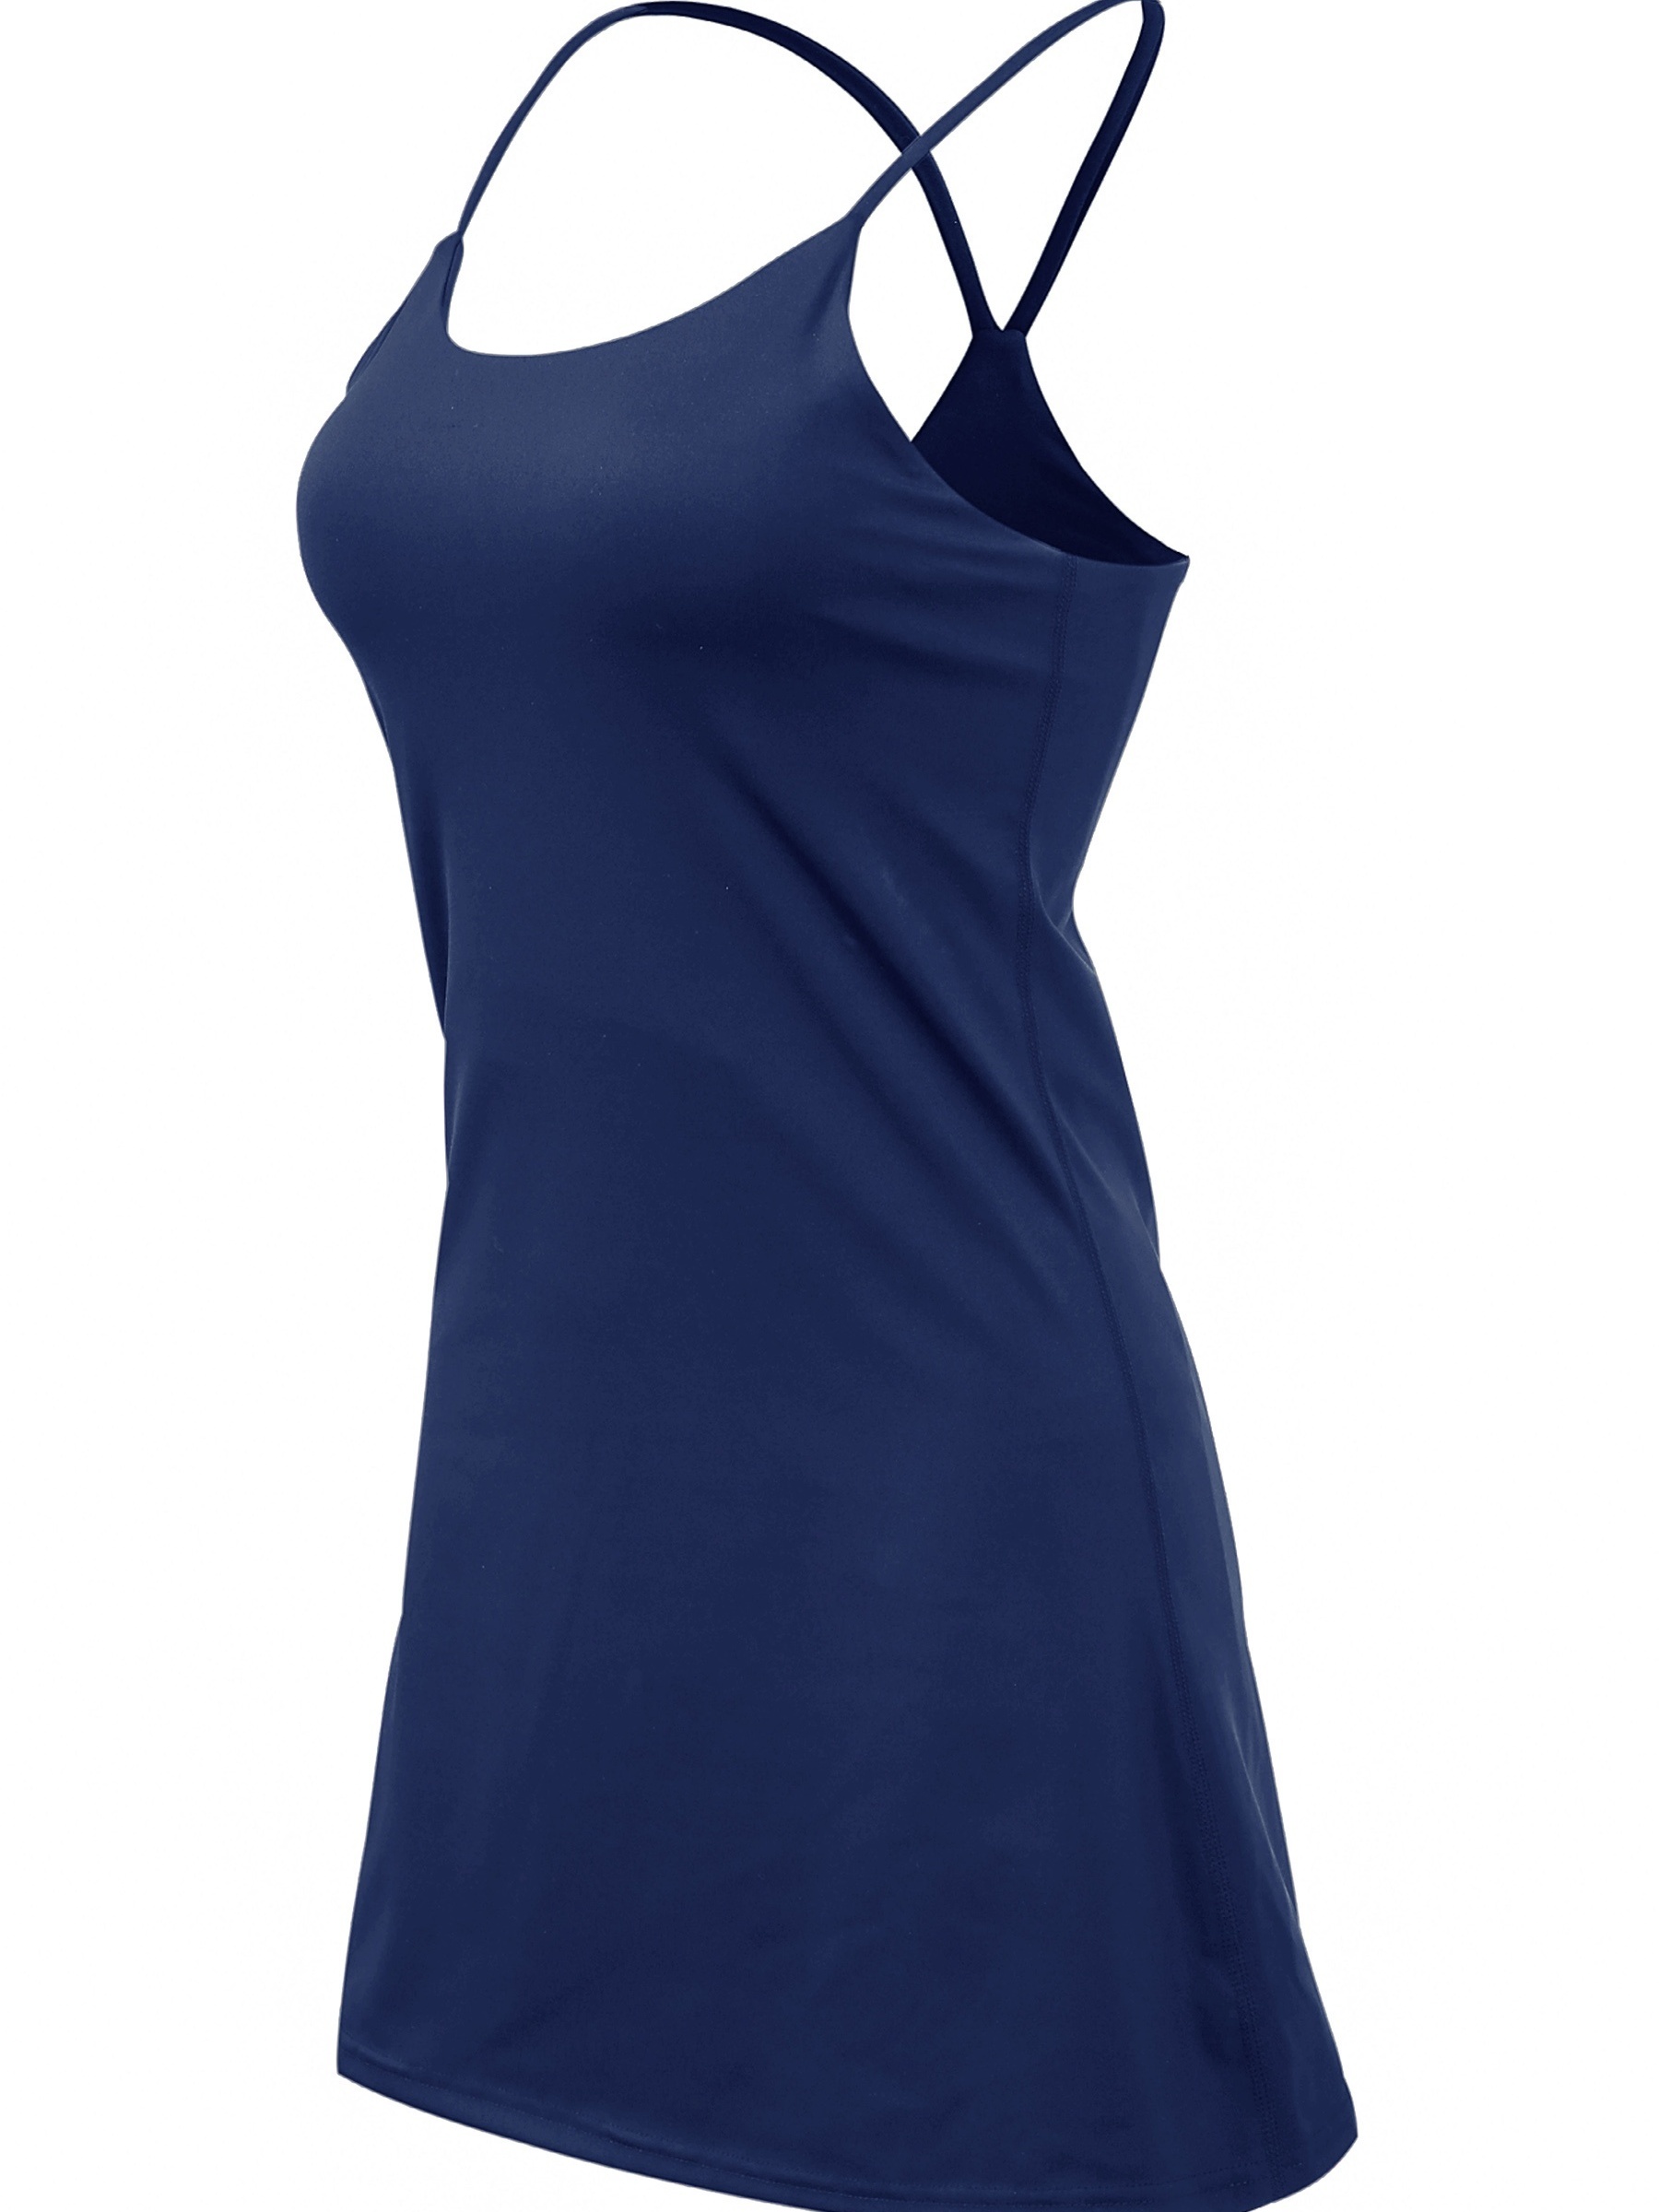  Tennis Dress for Women Backless Lace Up Workout Dress with  Built-in Bras & Shorts Exercise Athletic Golf Dresses for Women Black  X-Small : Clothing, Shoes & Jewelry